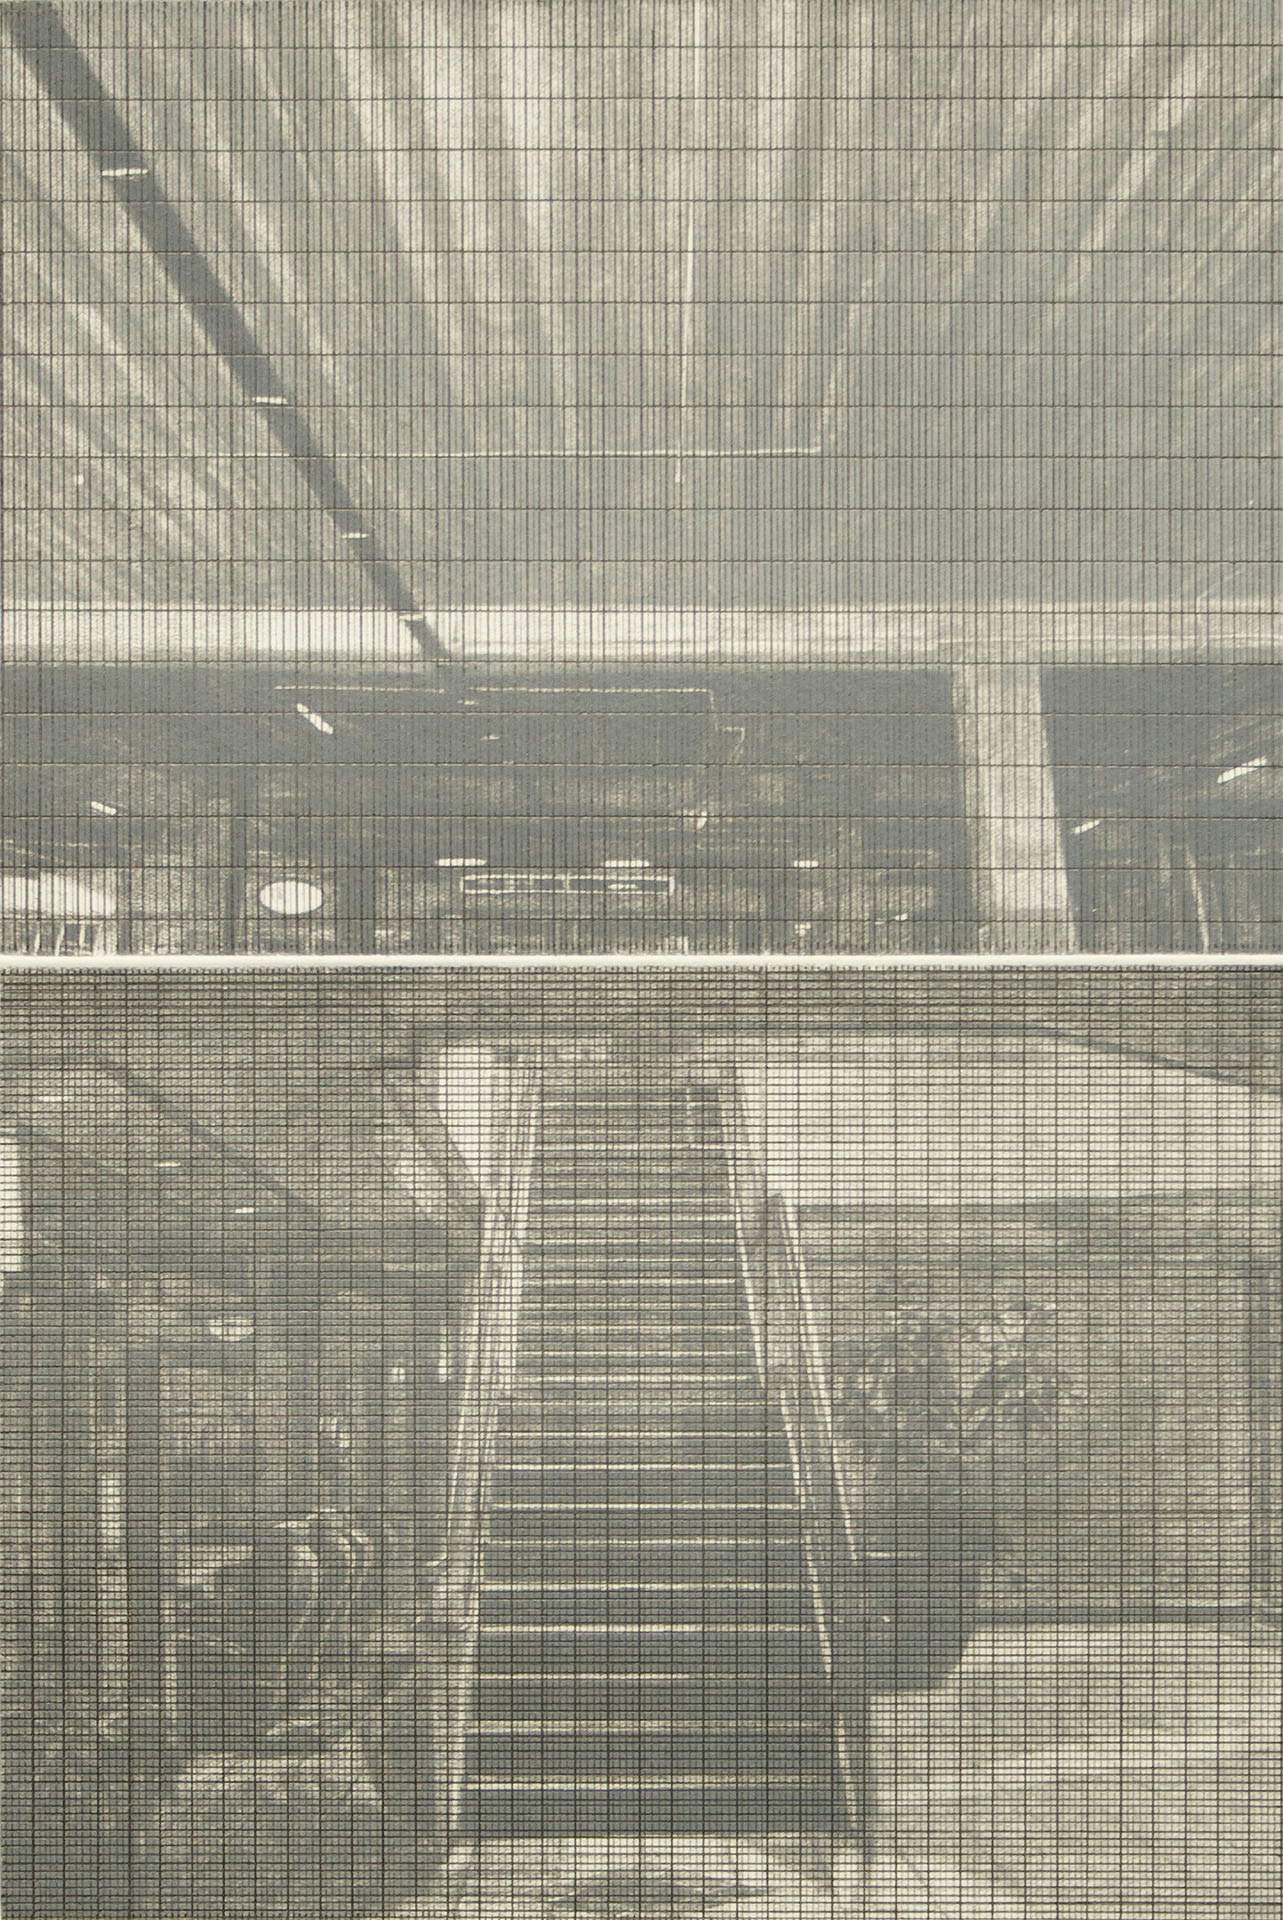 Stairs and Parking Building with Grids, 2009, burnished drypoint & graphite, 280 x 190mm